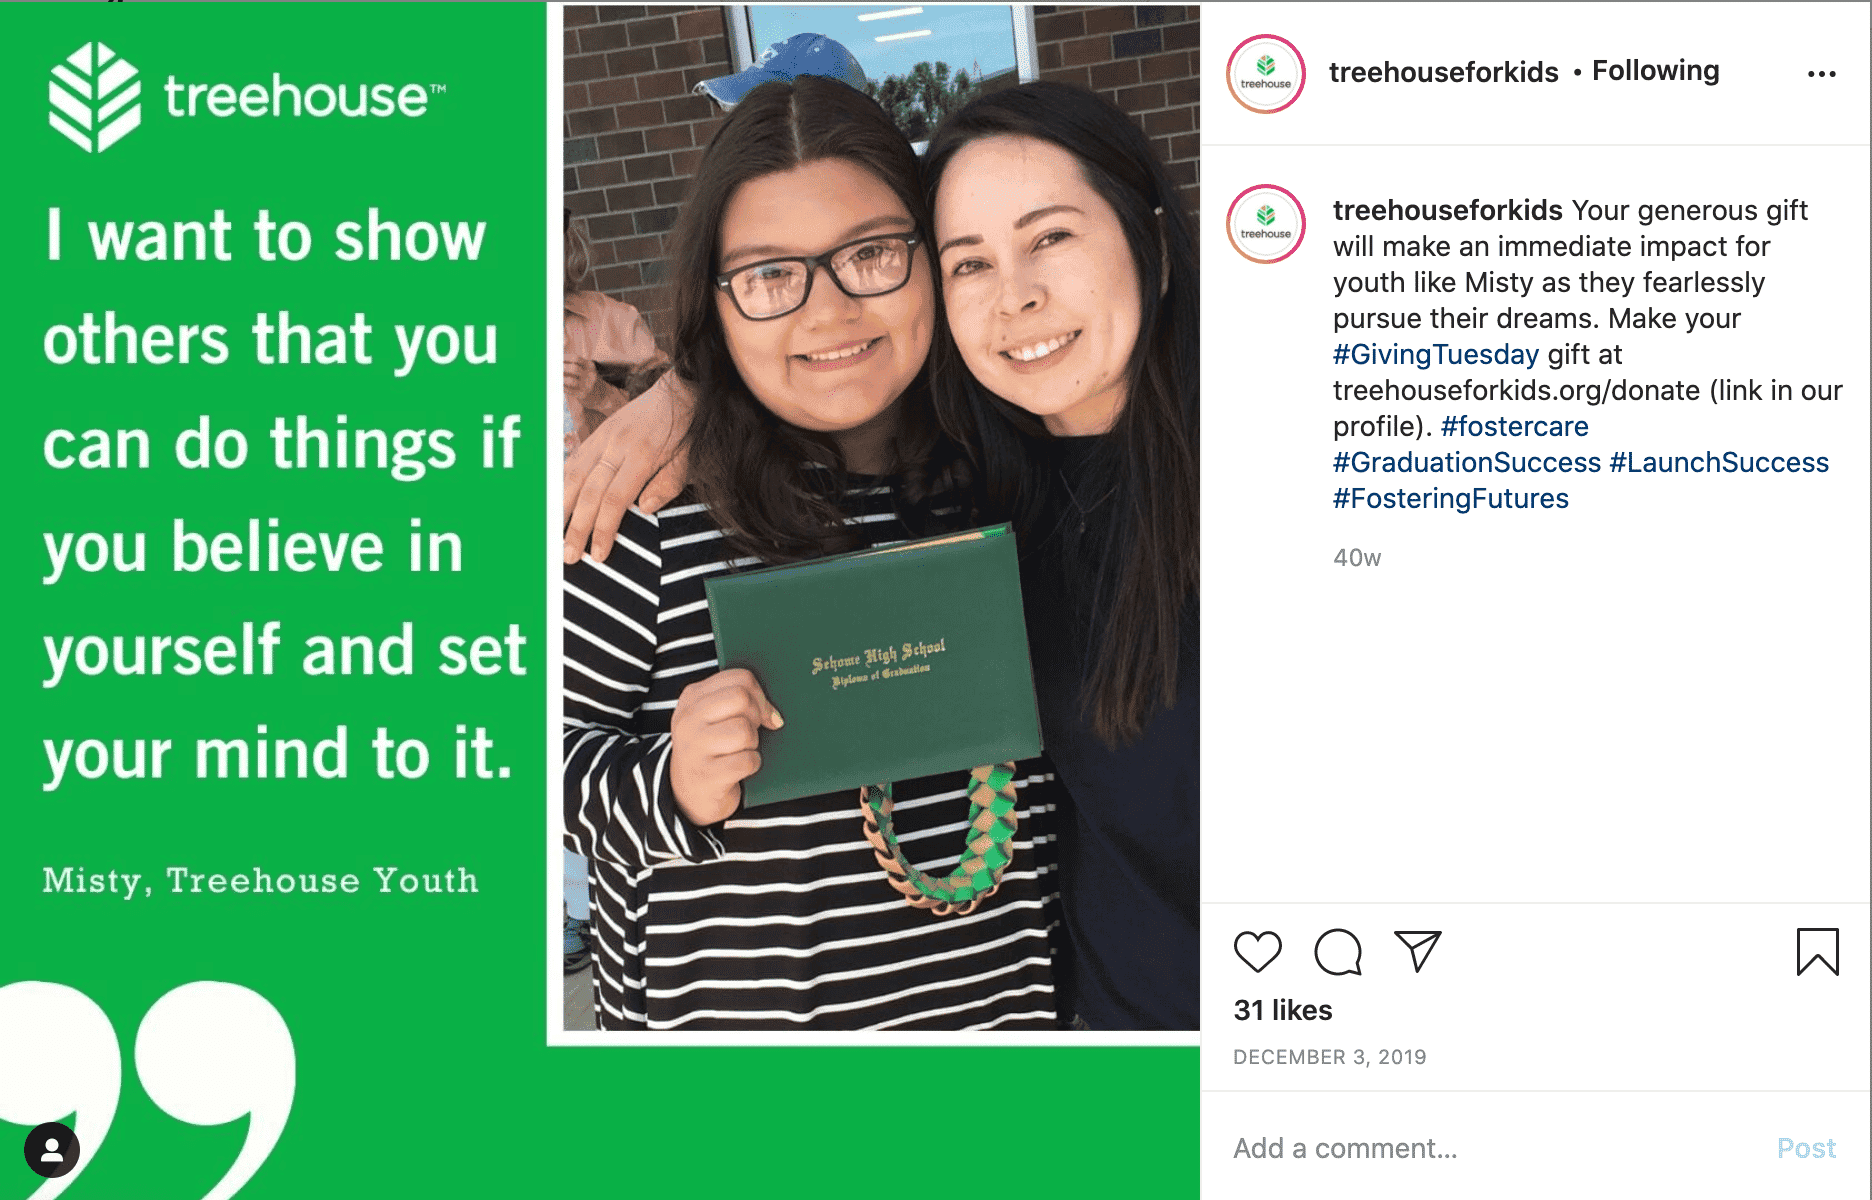 Example of Giving Tuesday social media post from Treehouse